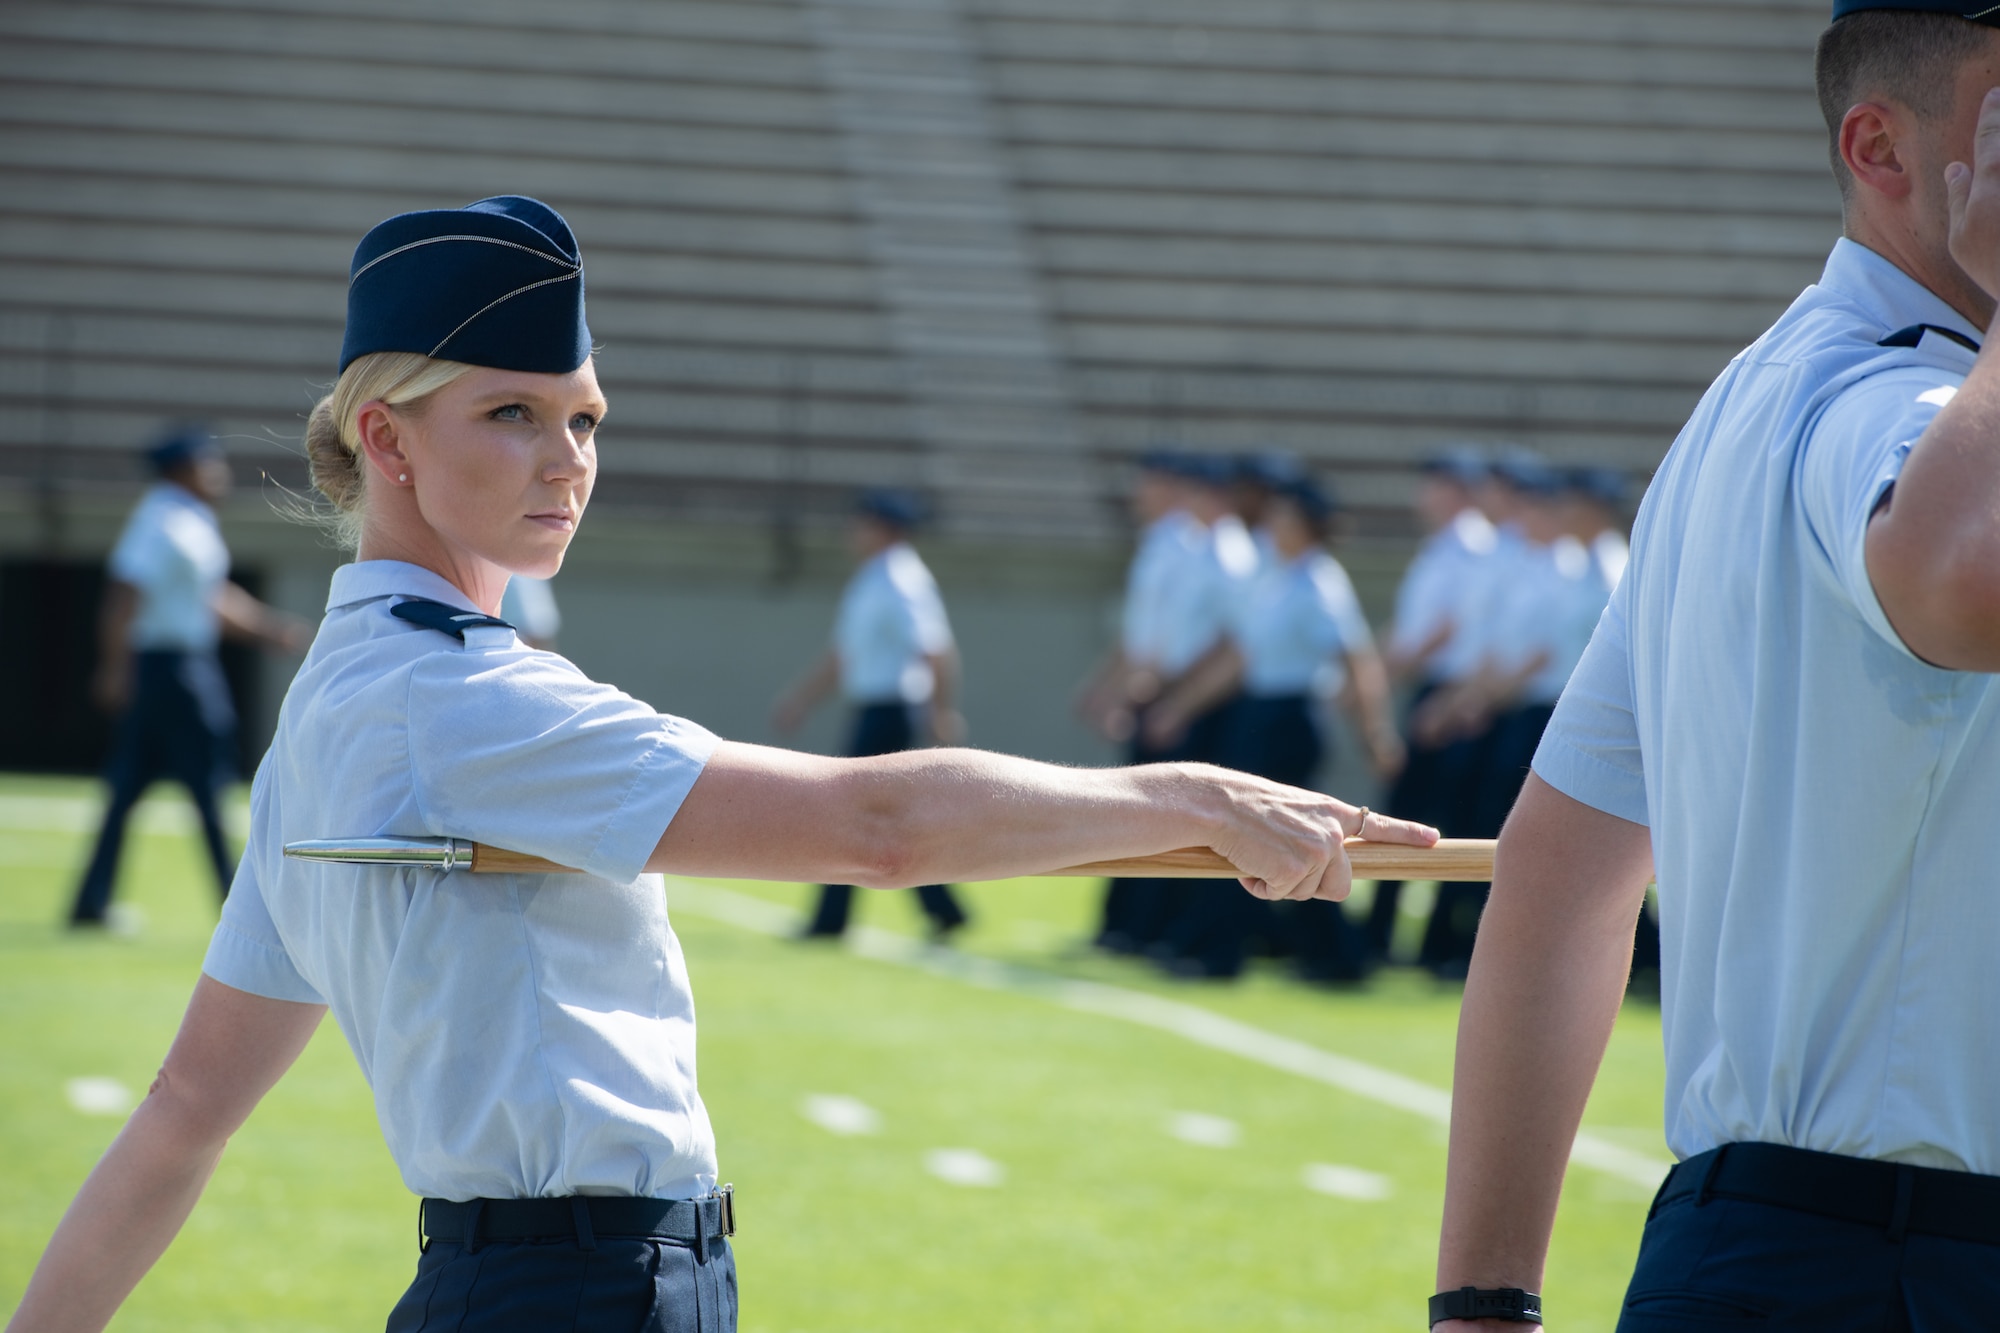 A newly commissioned officer a part of the Air Force’s Officer Training School class 19-07 participates in the graduation ceremony Sept. 27, 2019, in Montgomery, Alabama. Officer Training School’s class 19-07, also known as “Godzilla Class,” spent the last eight weeks taking part in a series of field training and classroom leadership exercises preparing them to become Air Force officers.